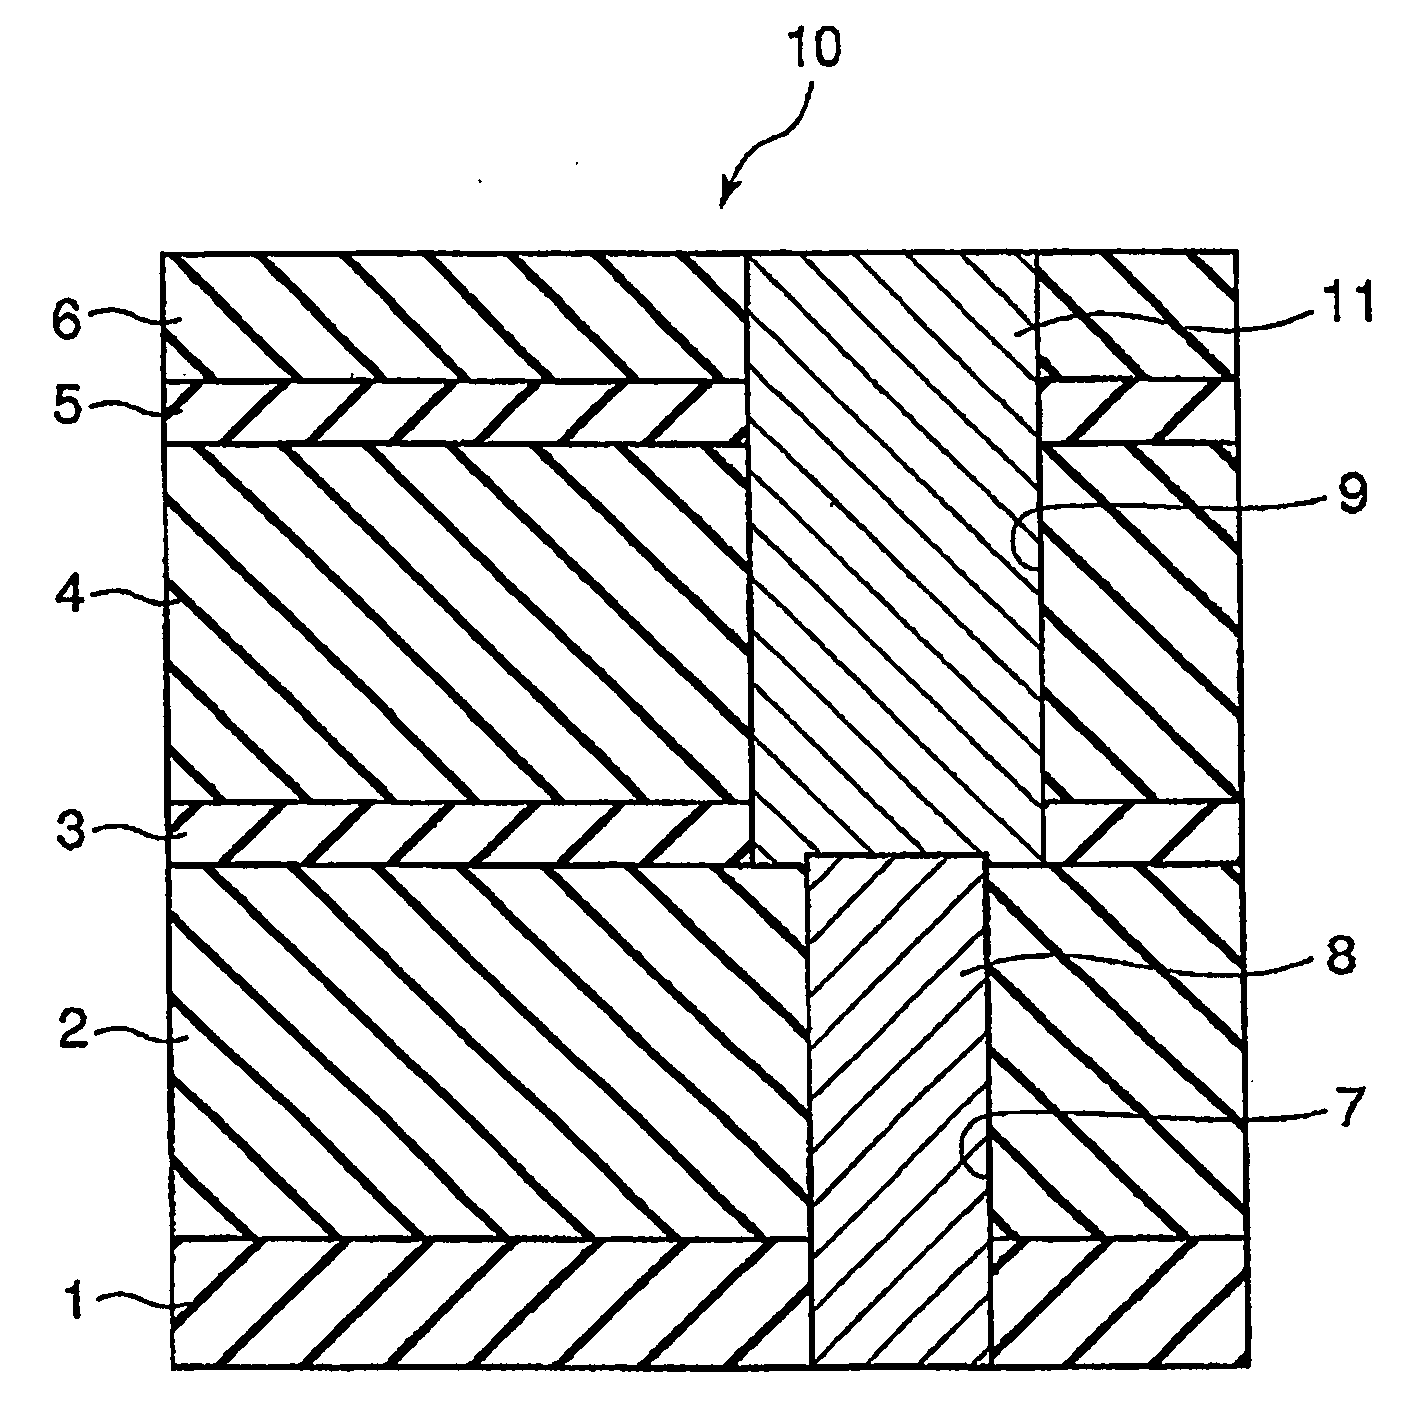 Interlayer Insulating Film, Interconnection Structure, and Methods of Manufacturing the Same